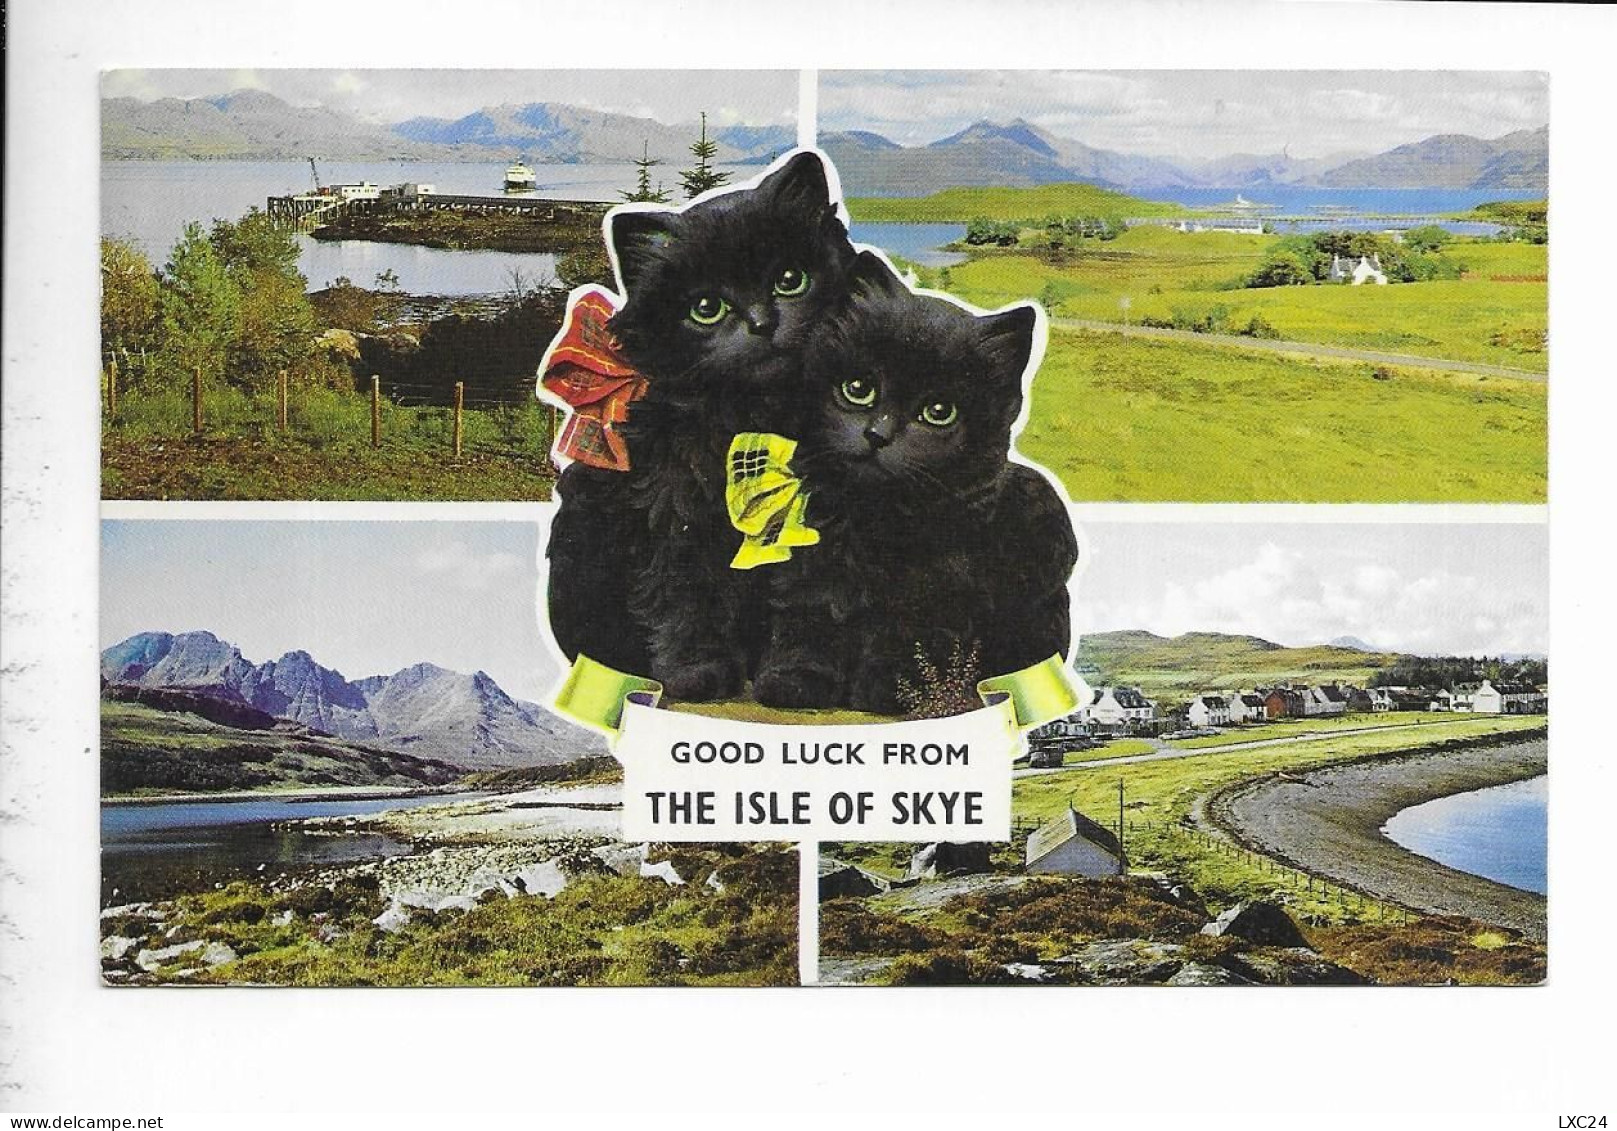 GOOD LUCK FROM THE ISLE OF SKYE. - Inverness-shire